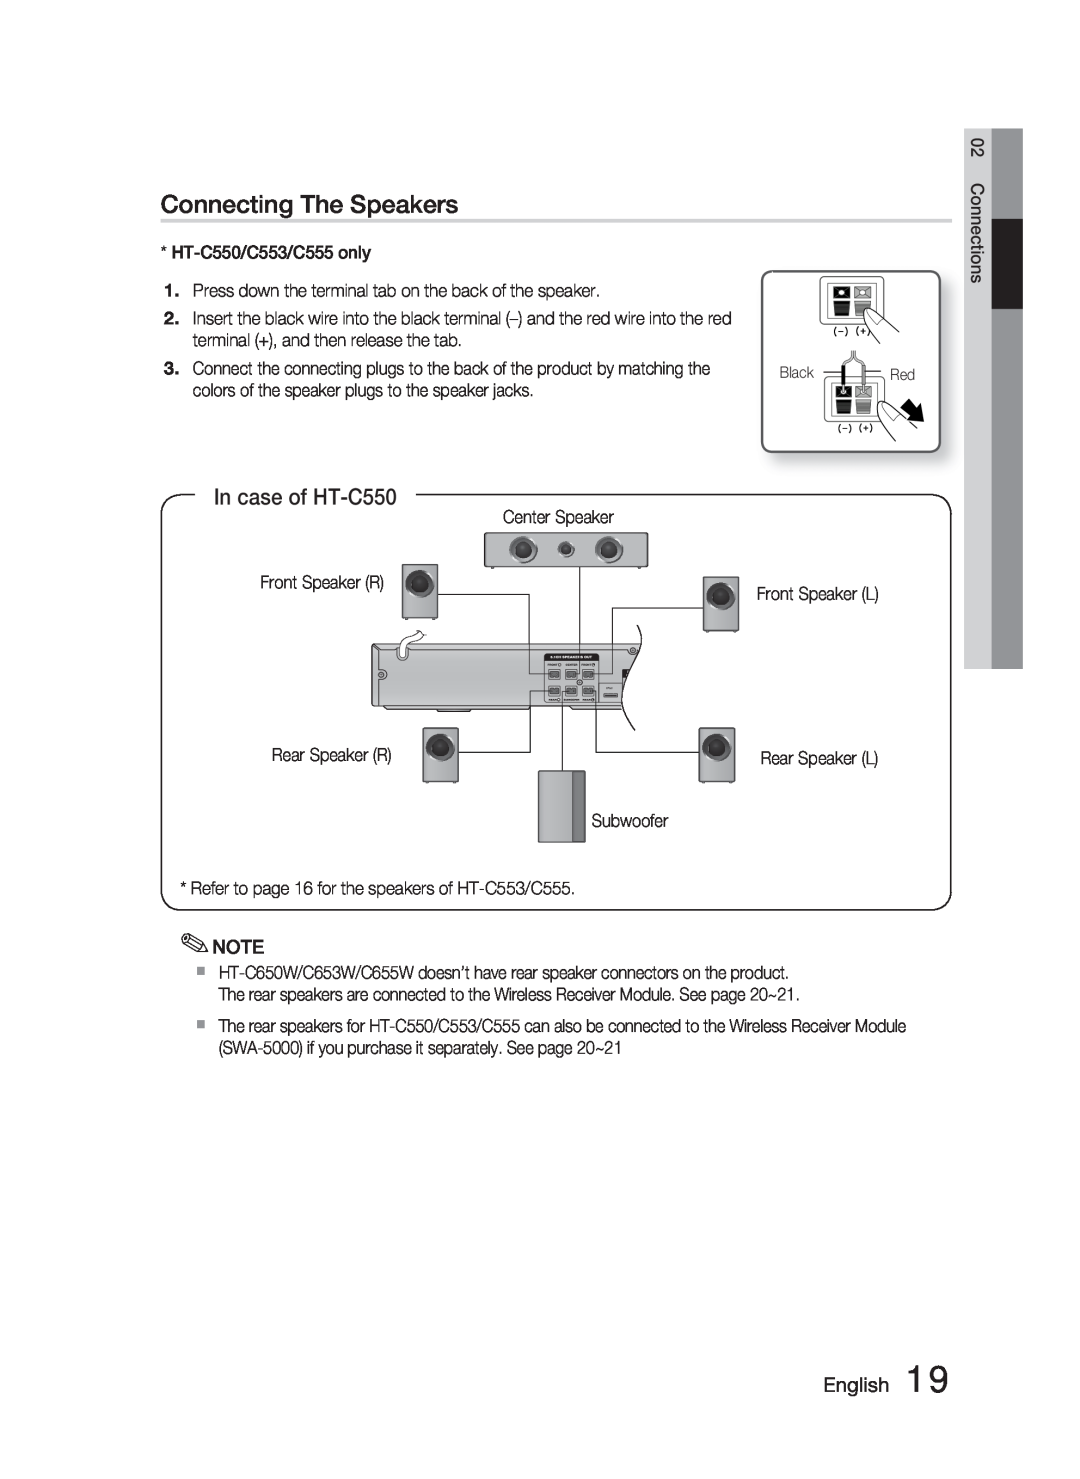 Samsung HT-C550-XAC user manual Connecting The Speakers, In case of HT-C550, English 